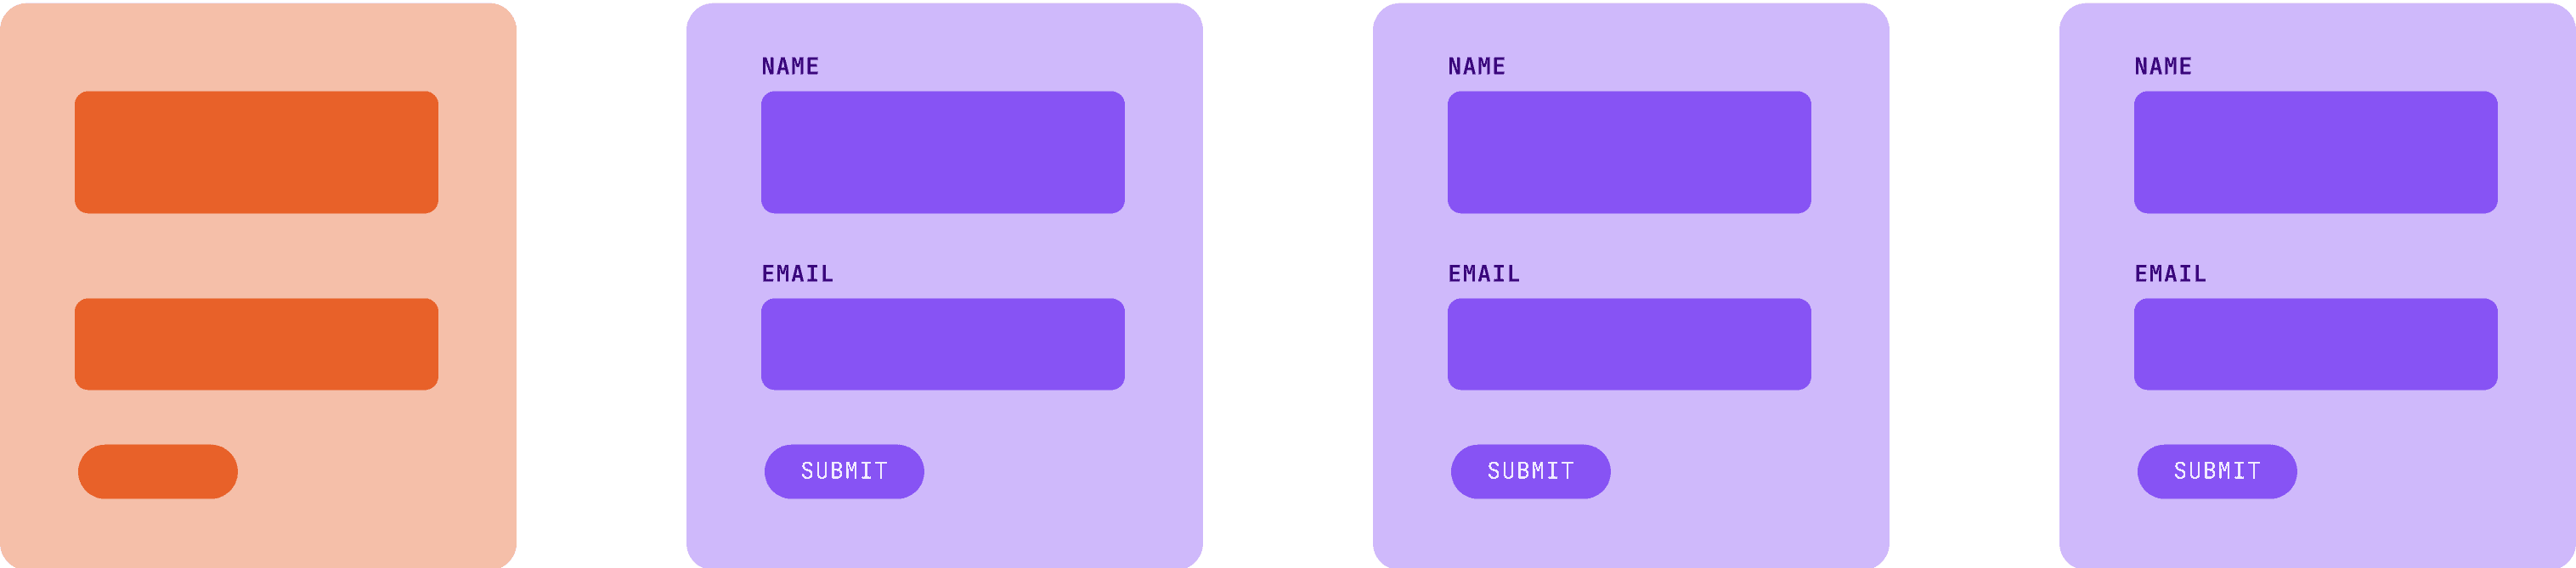 1 broken form and 3 forms with labels like Name and Email to represent 1 in 4  forms that are missing clear labels.